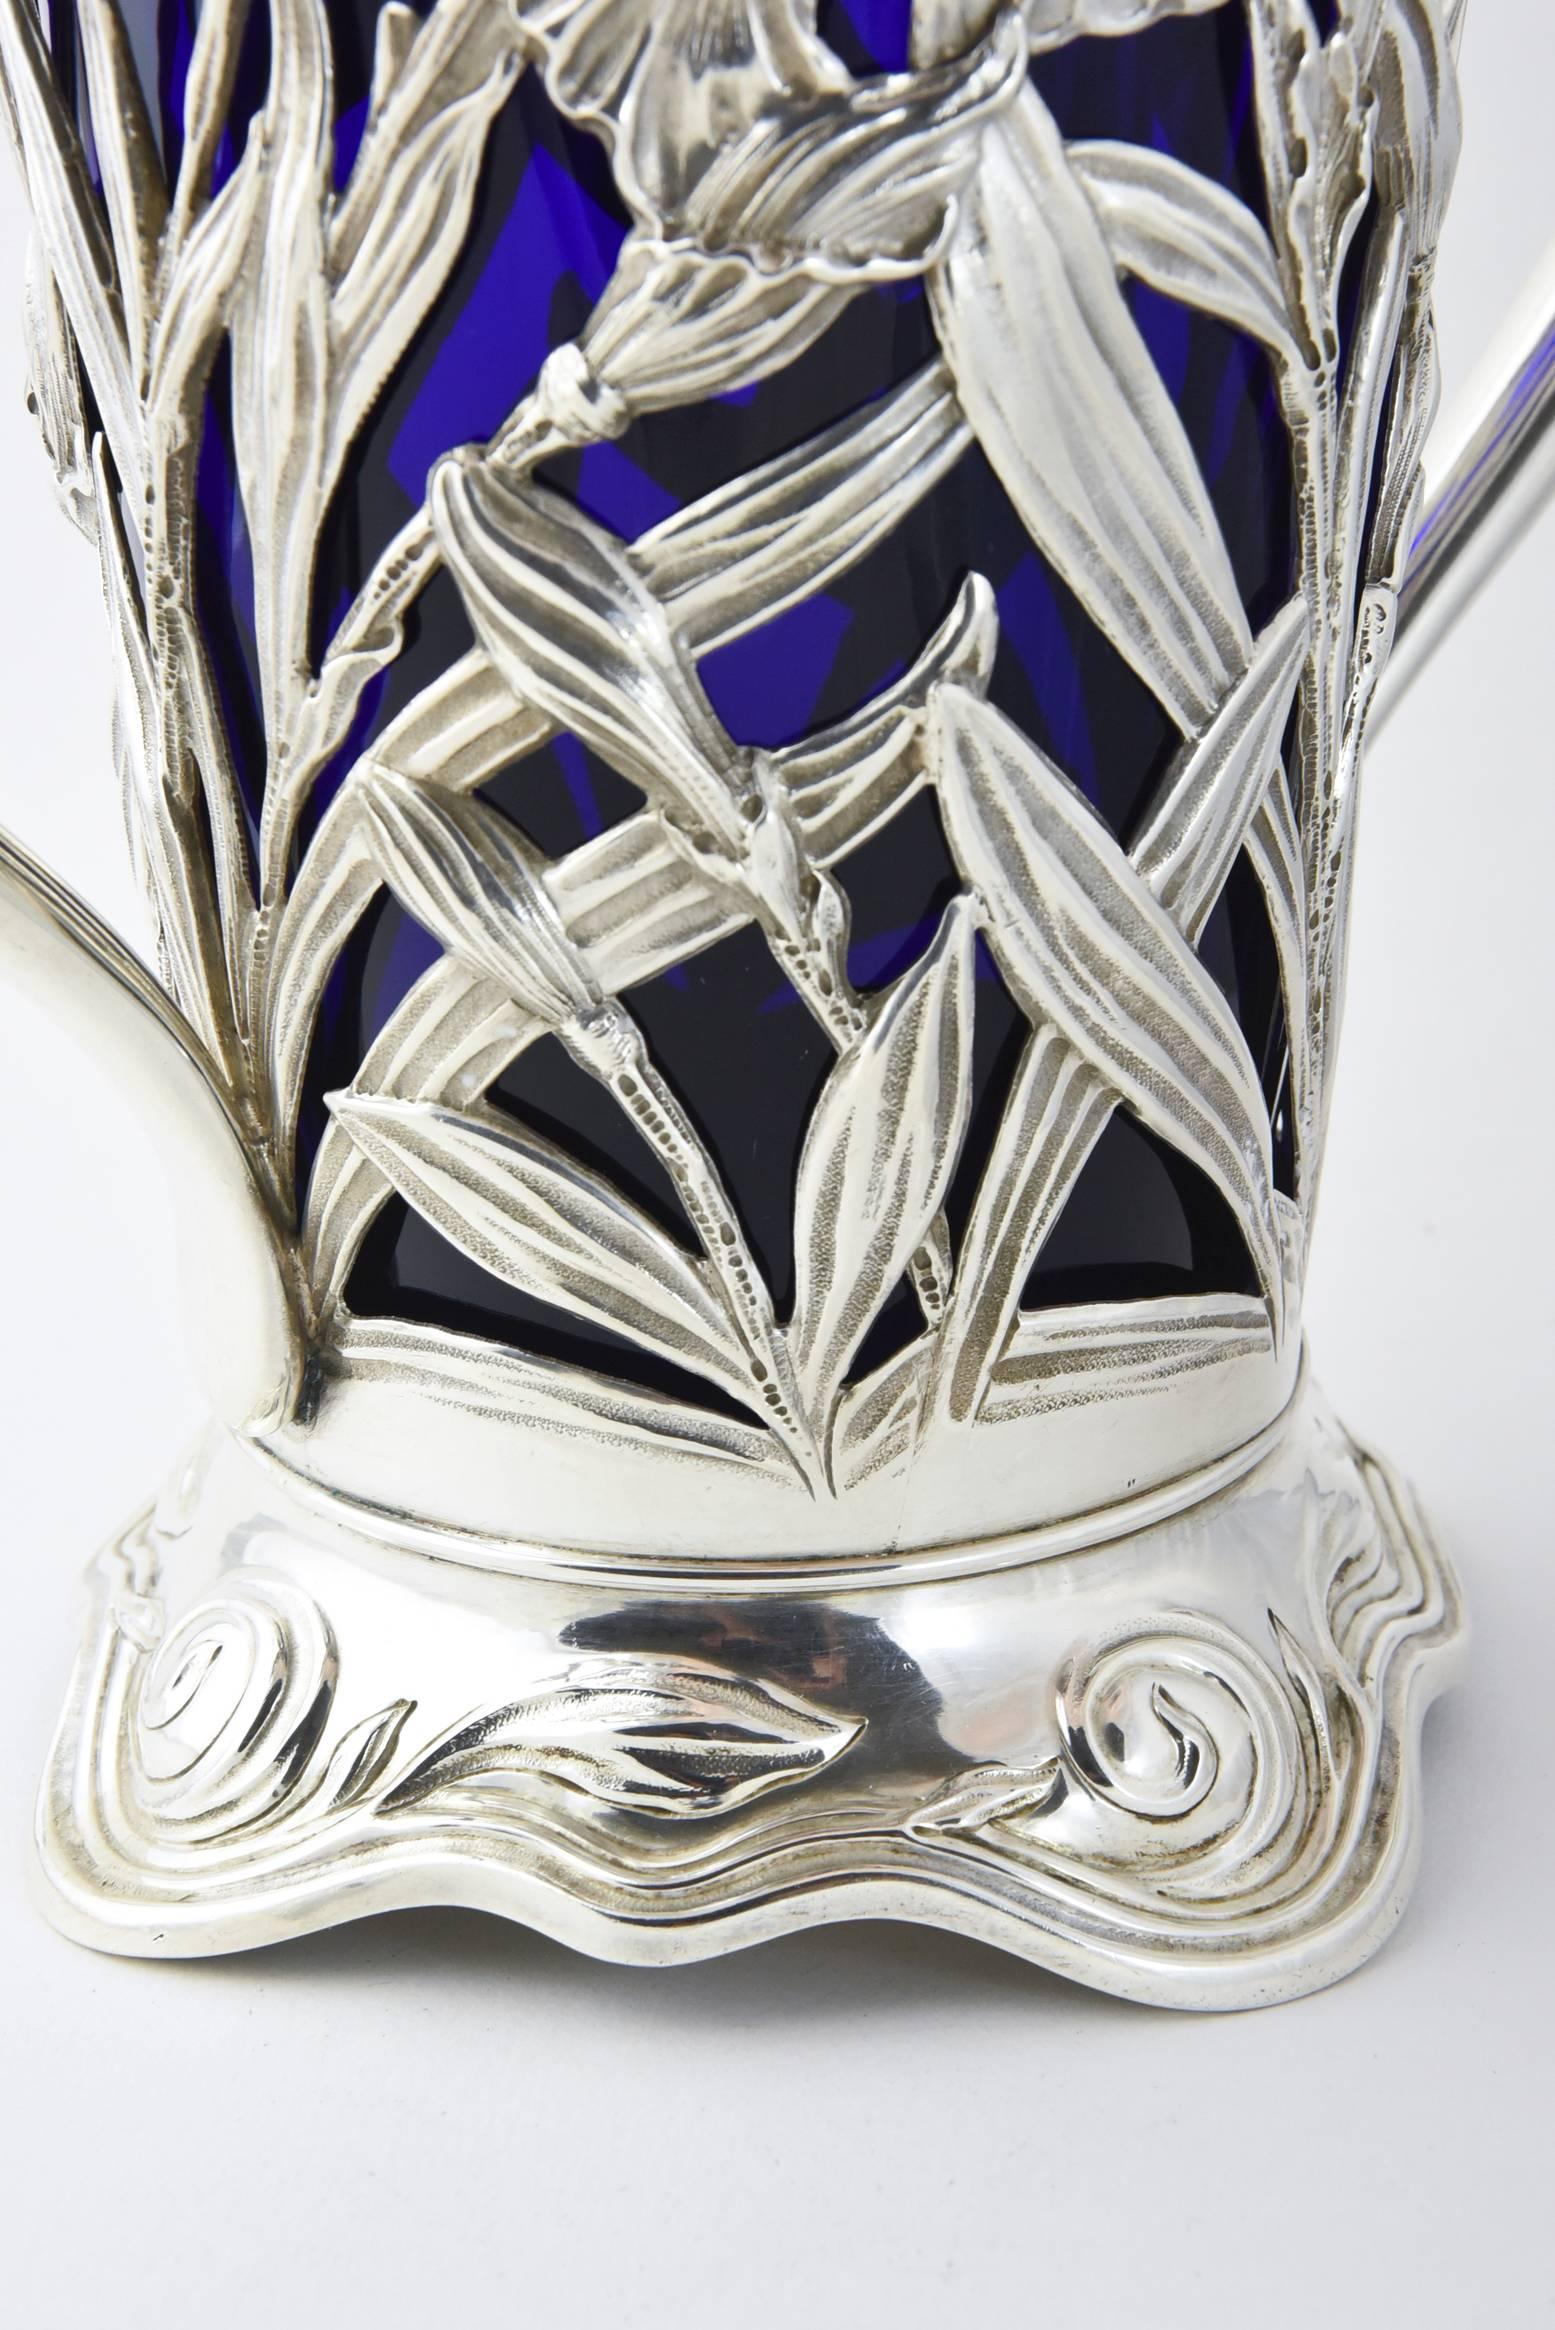 Unknown Art Nouveau Floral Repousse Sterling Handled Vase and Blue Glass Insert